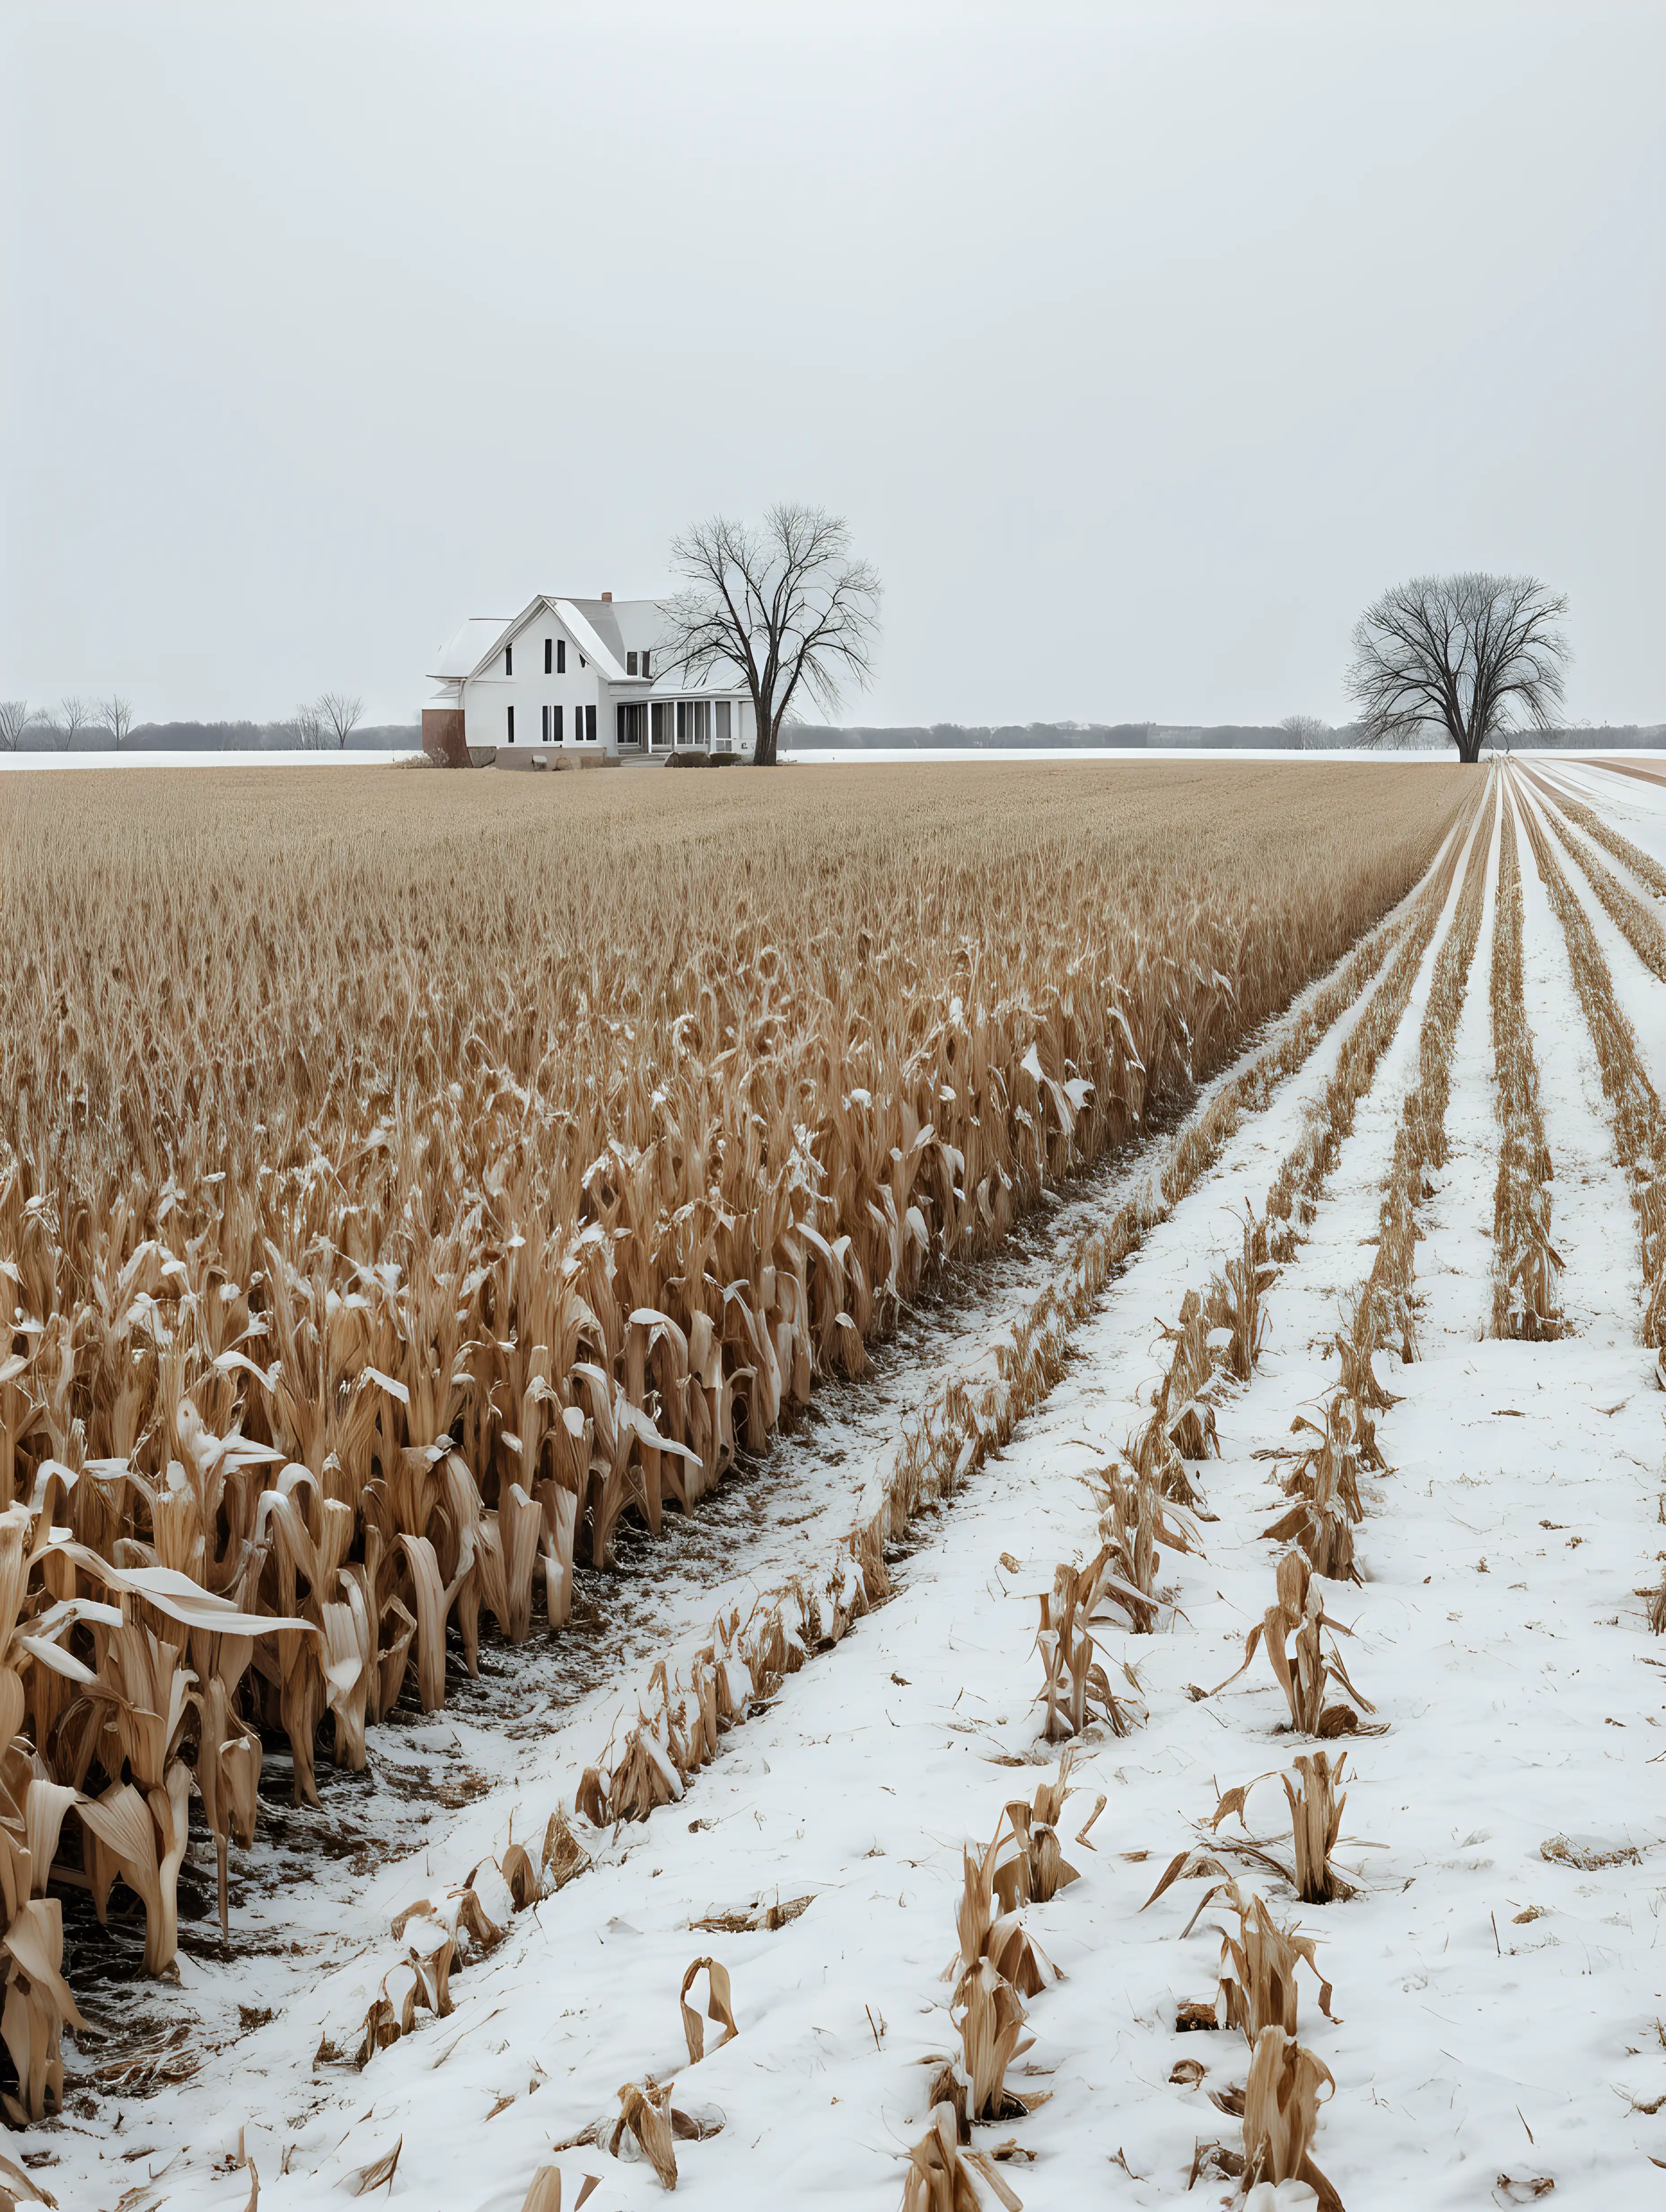 Midwest Winter Scene with Cornfield Snow and Distant House